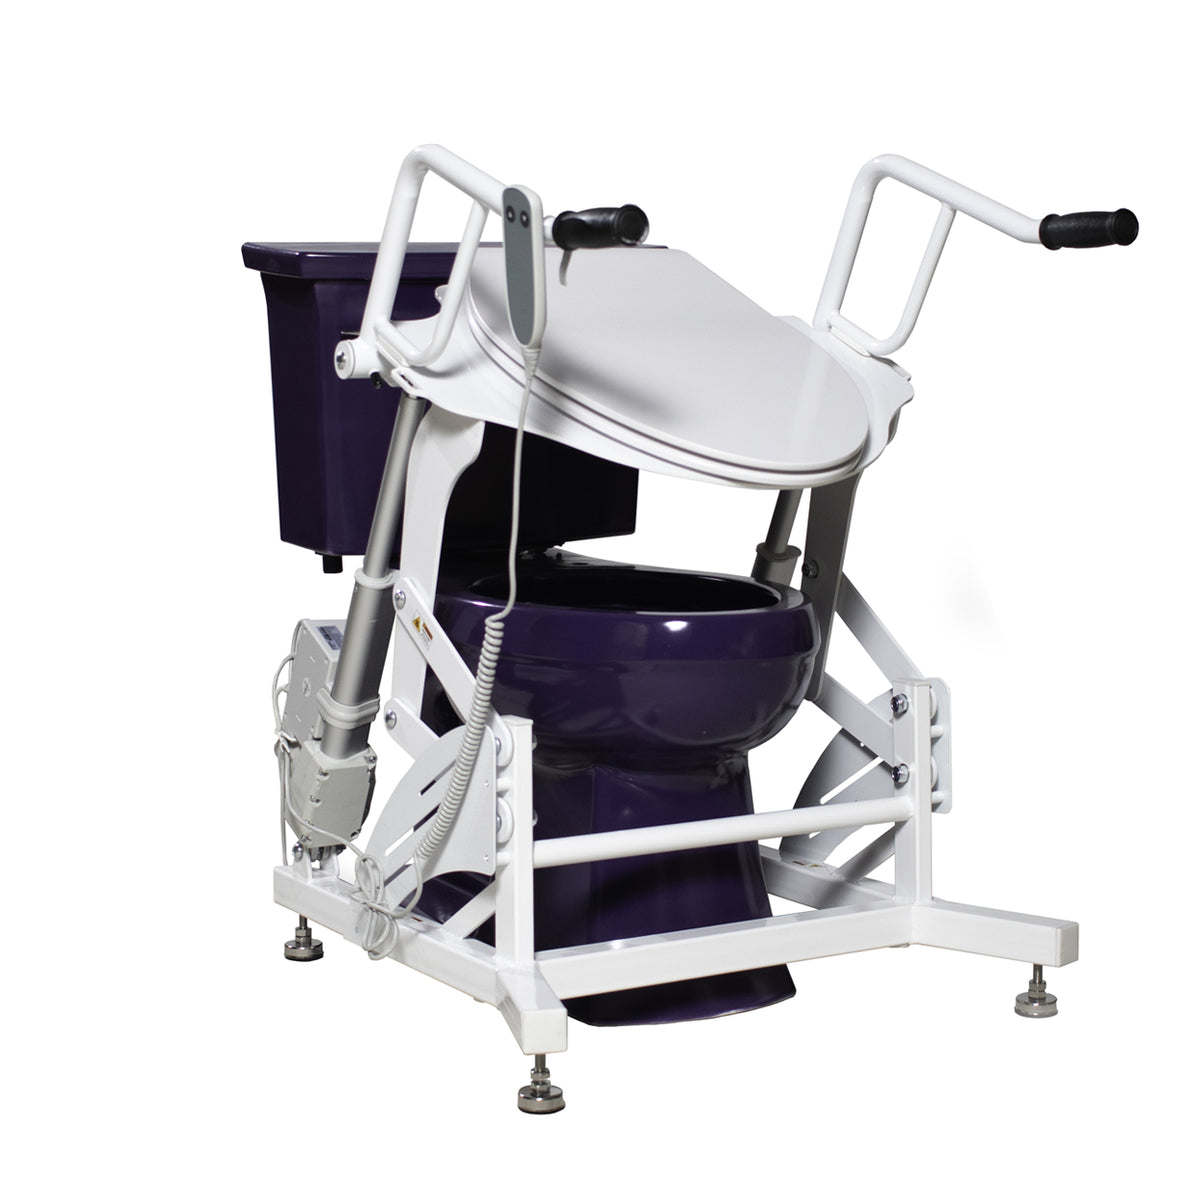 http://dignitylifts.com/cdn/shop/products/1--Dignity-Lifts-Toilet-Lift-BL1-1250-cropped-located_1200x1200.jpg?v=1636387583